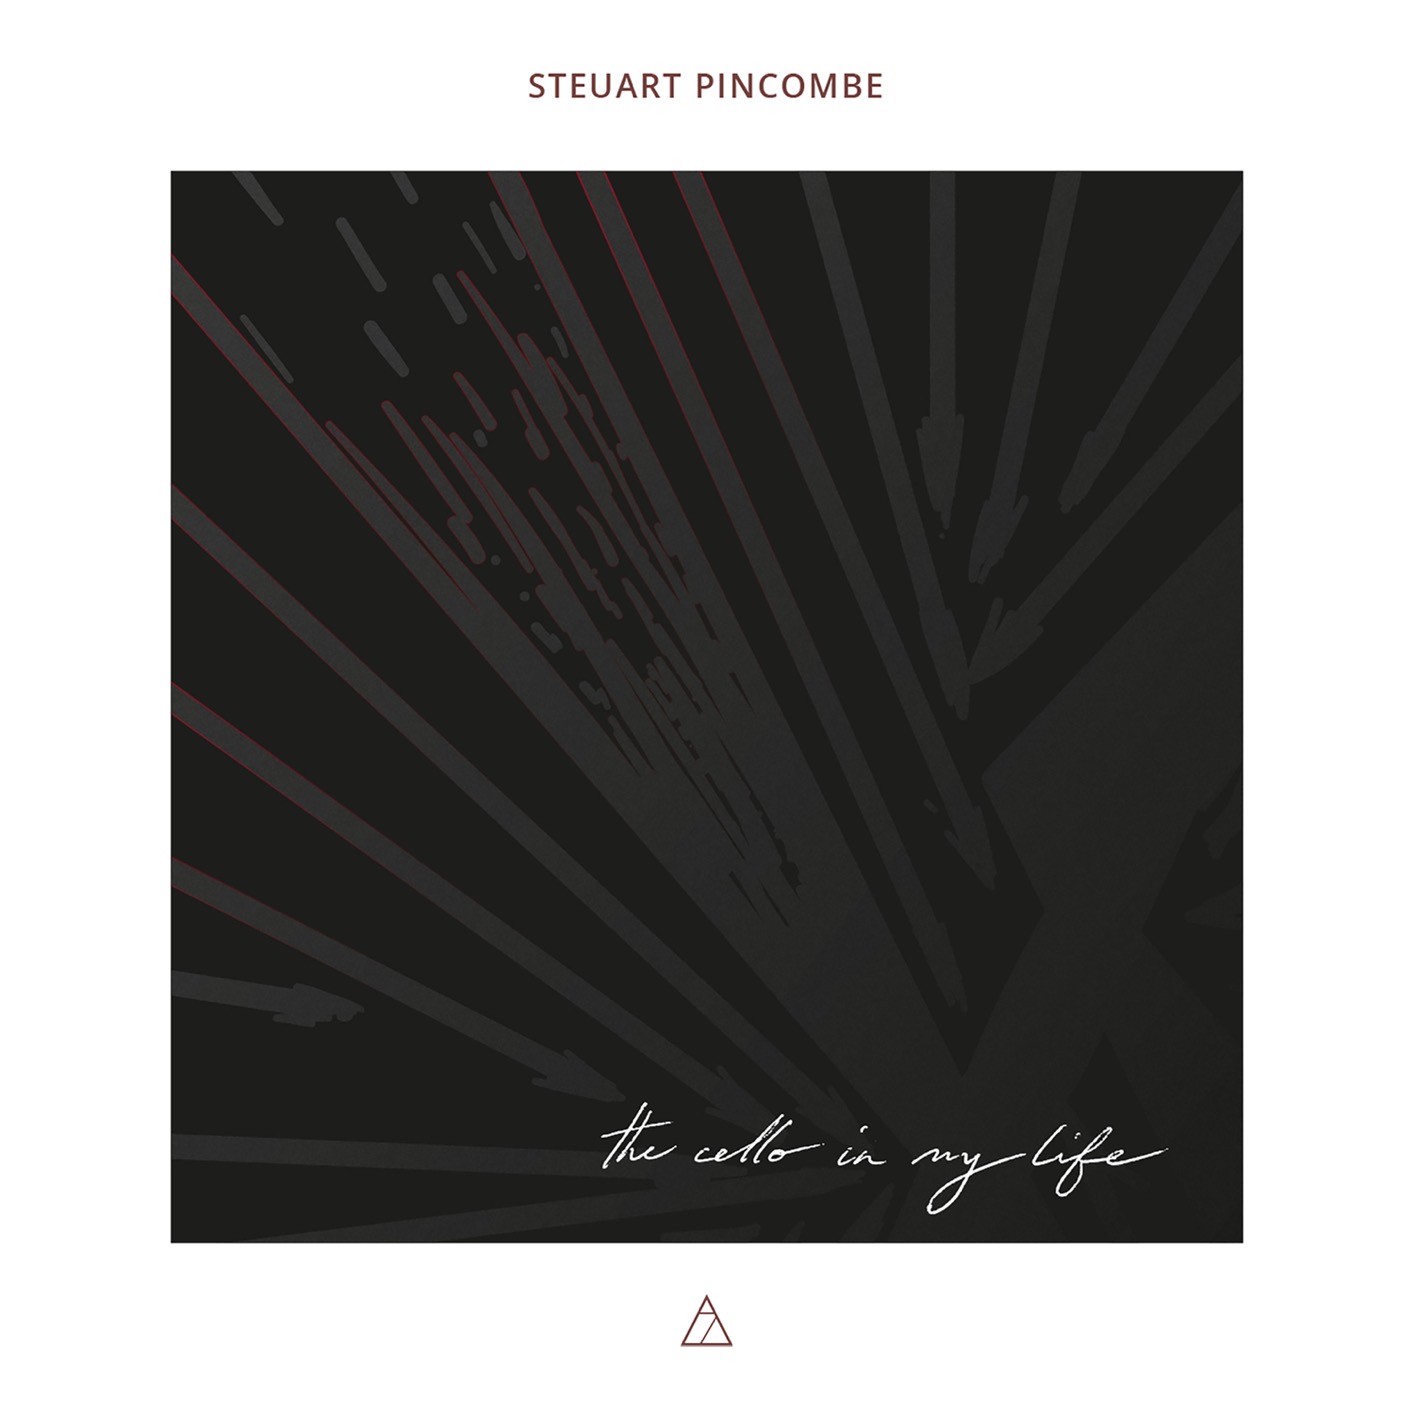 Steuart Pincombe – the cello is my life (2020) [FLAC 24bit/192kHz]